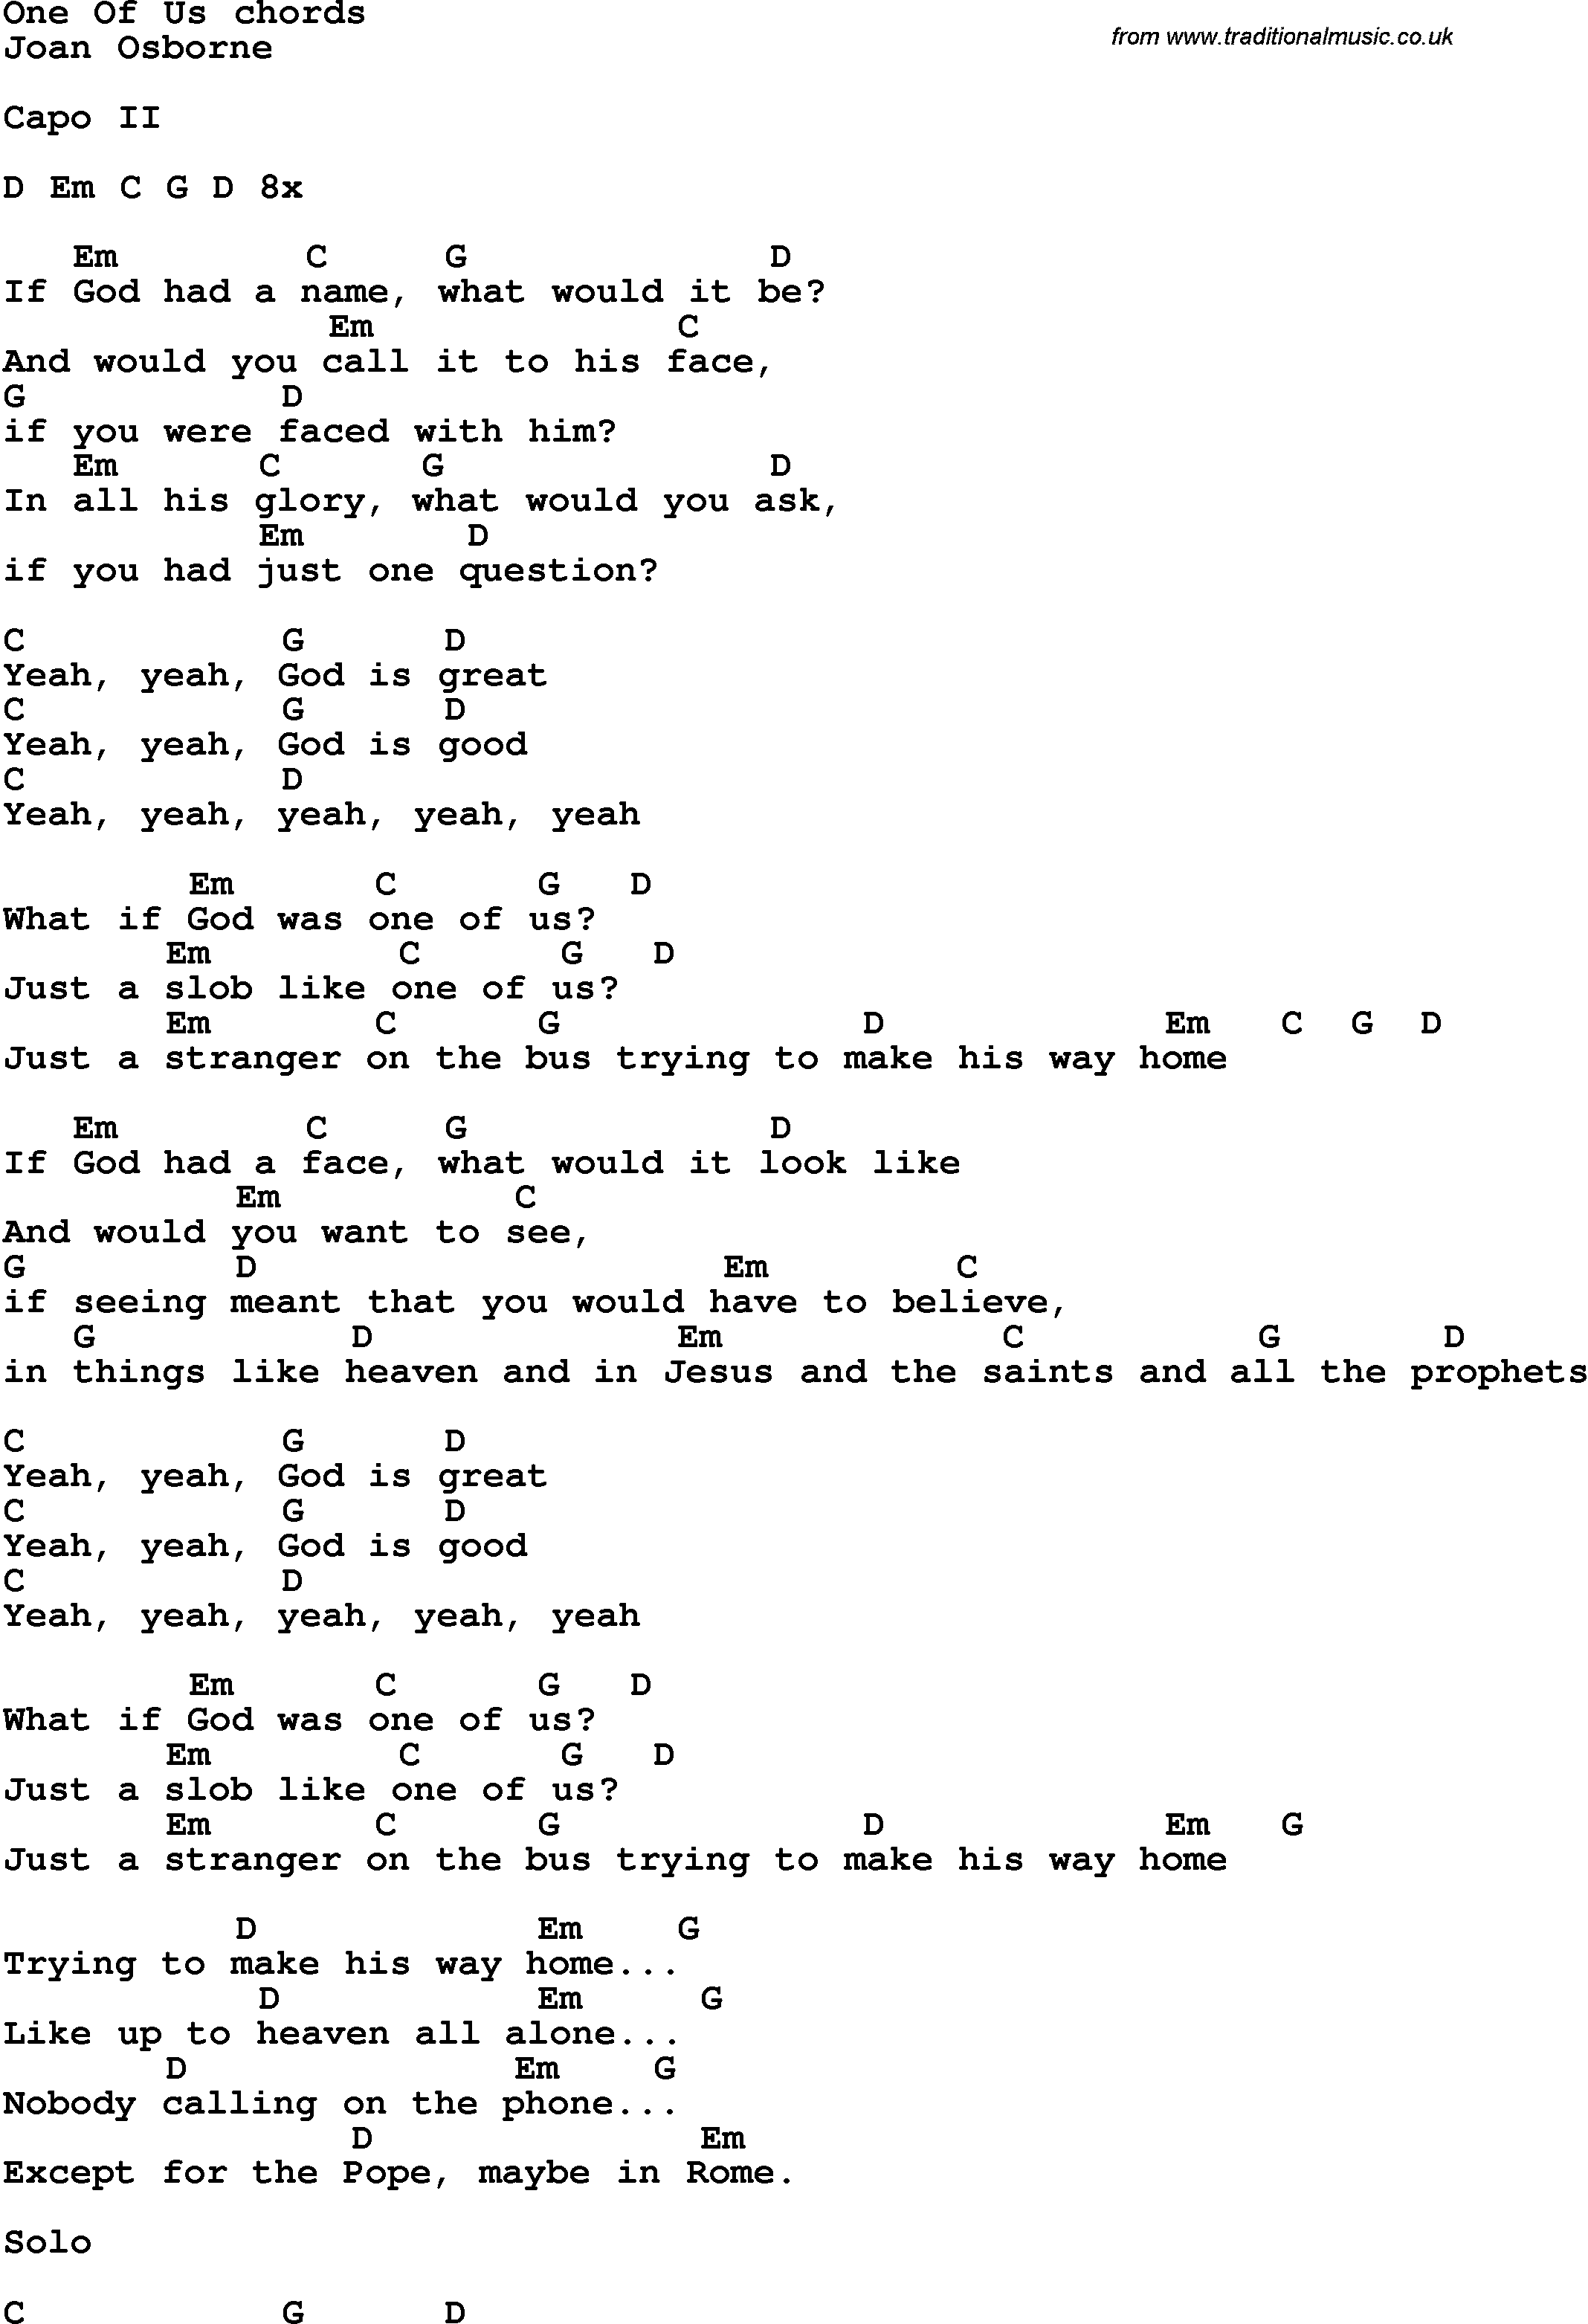 Song Lyrics with guitar chords for One Of Us